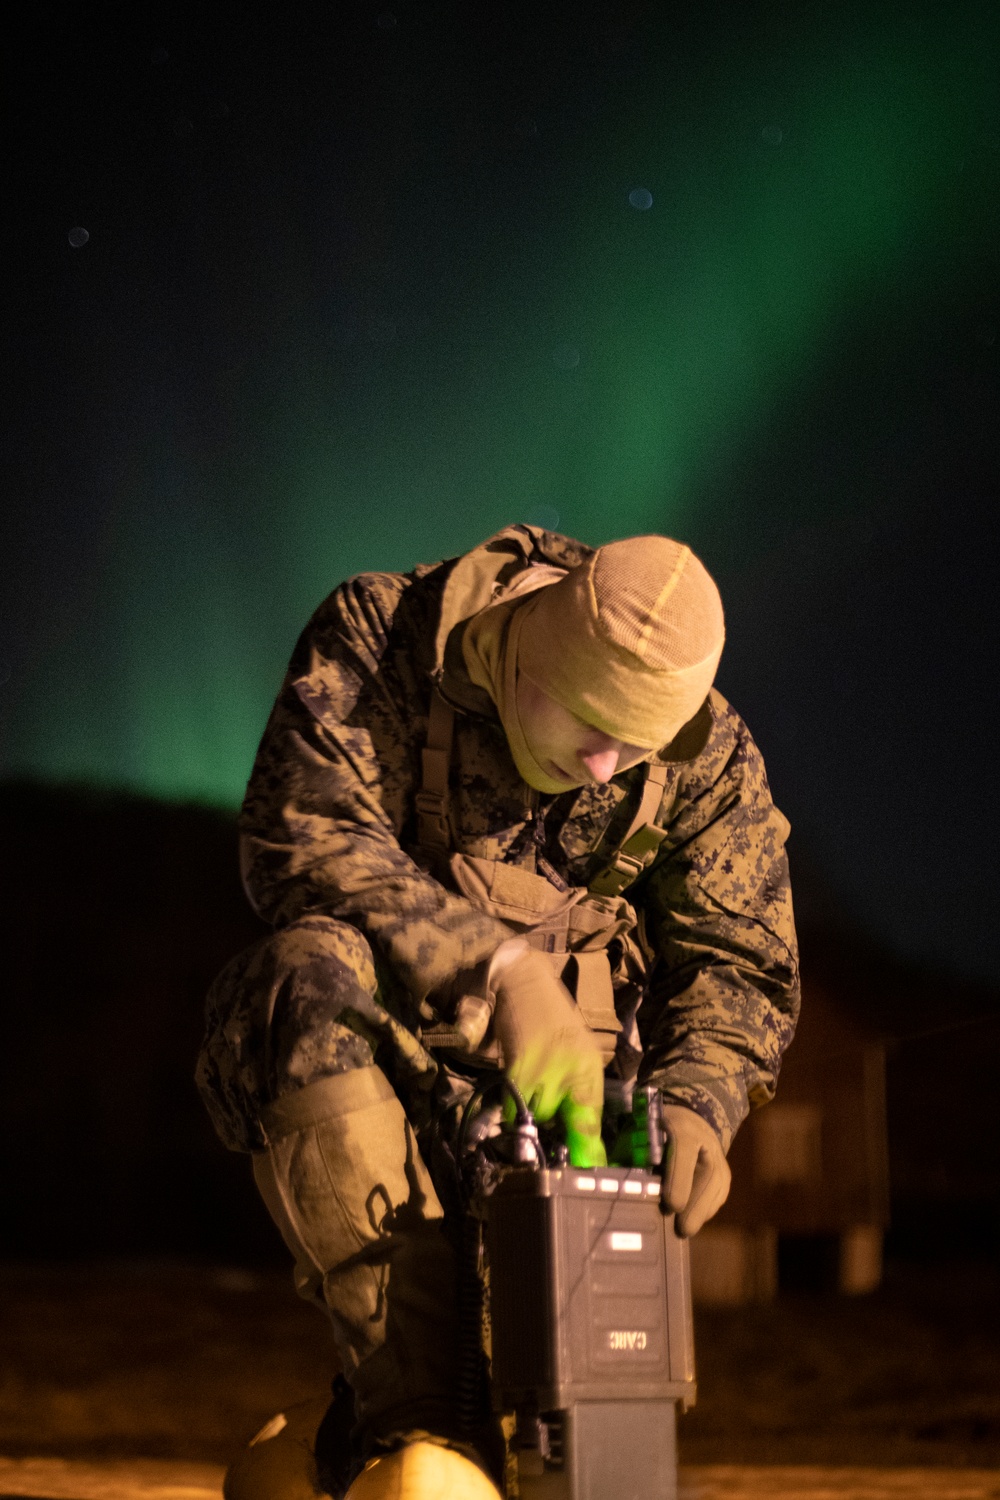 3/6 Moves Through Norway for Exercise Cold Response 22